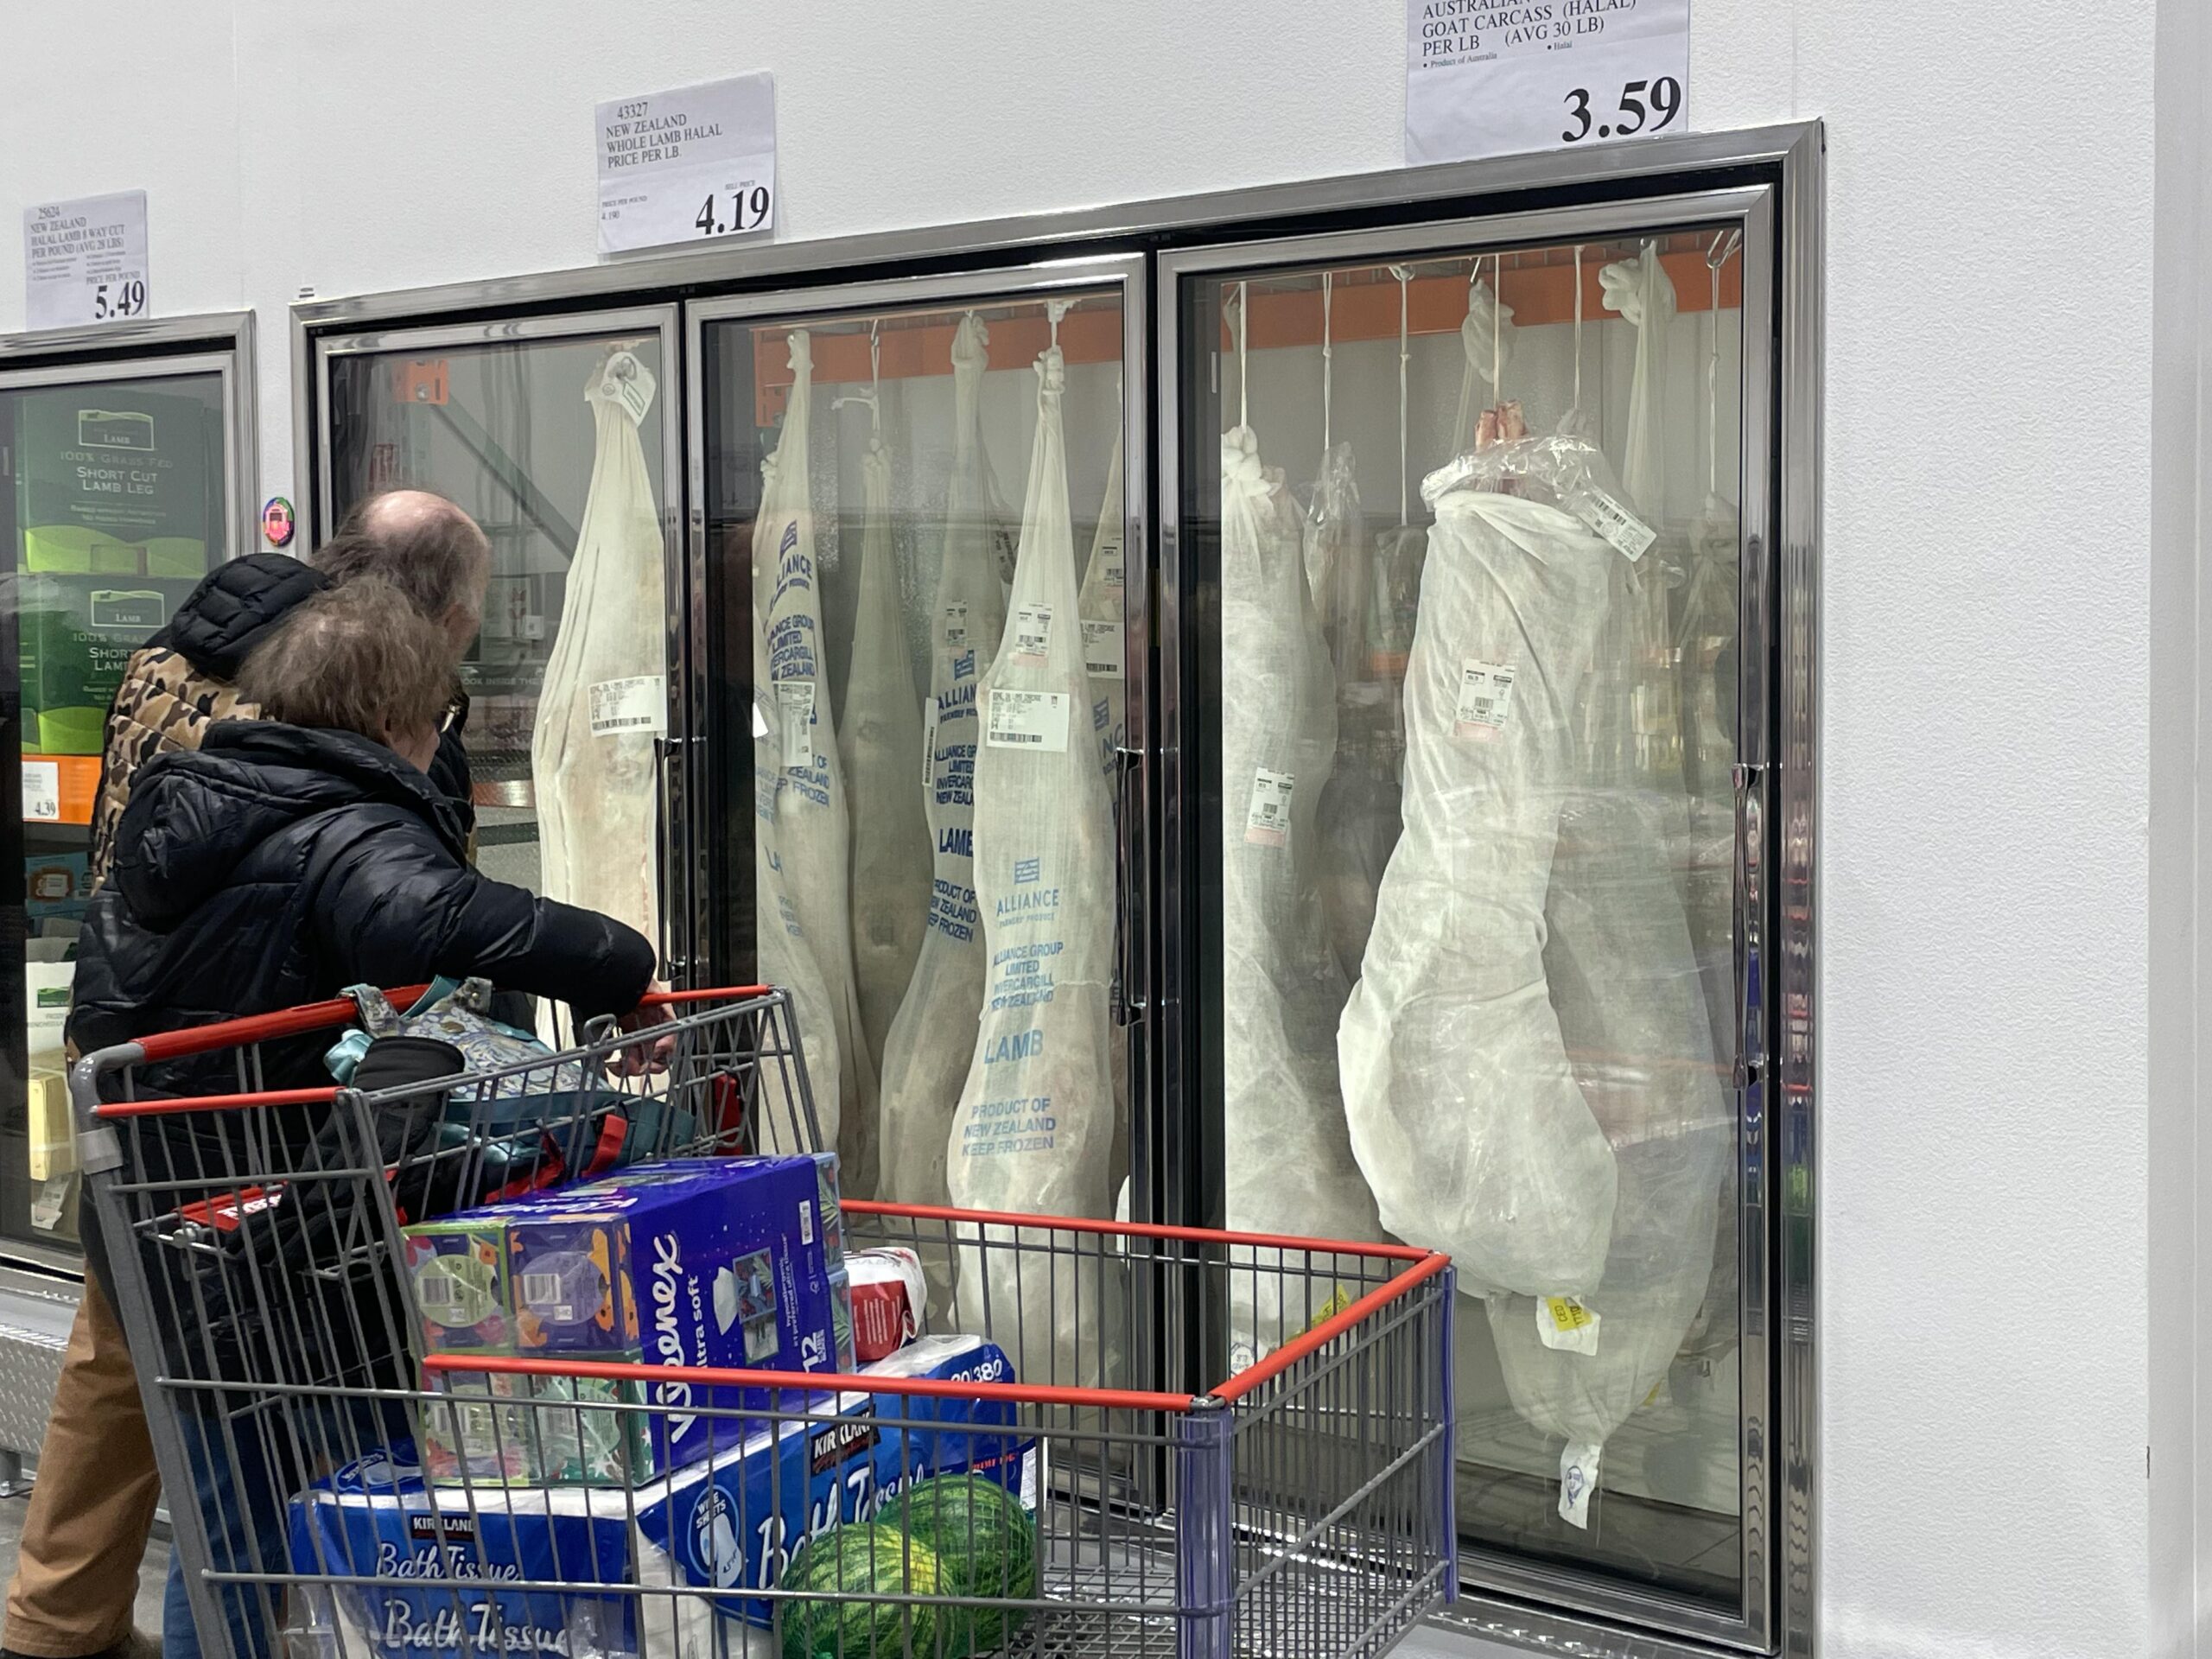 A couple shopping in Costco.